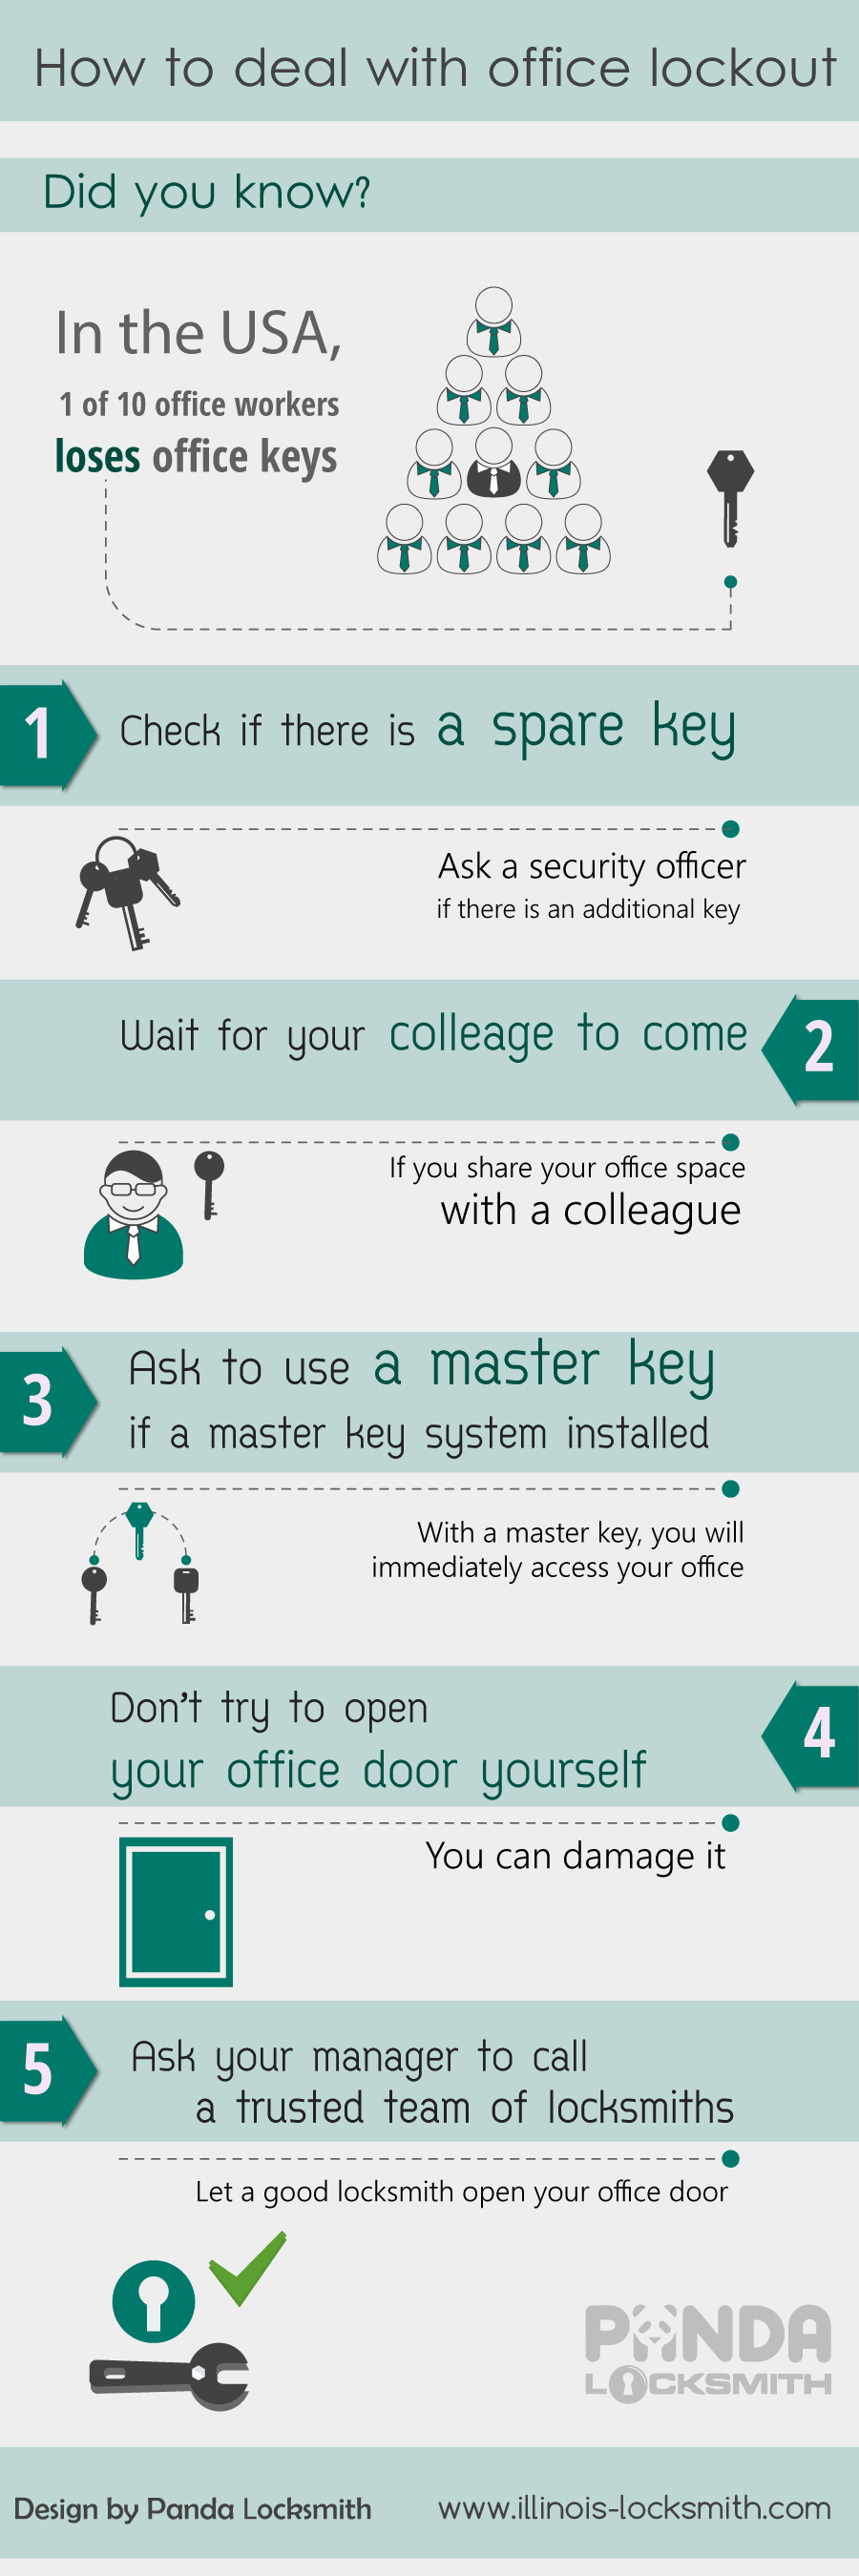 how to deal with office lockout - infographic